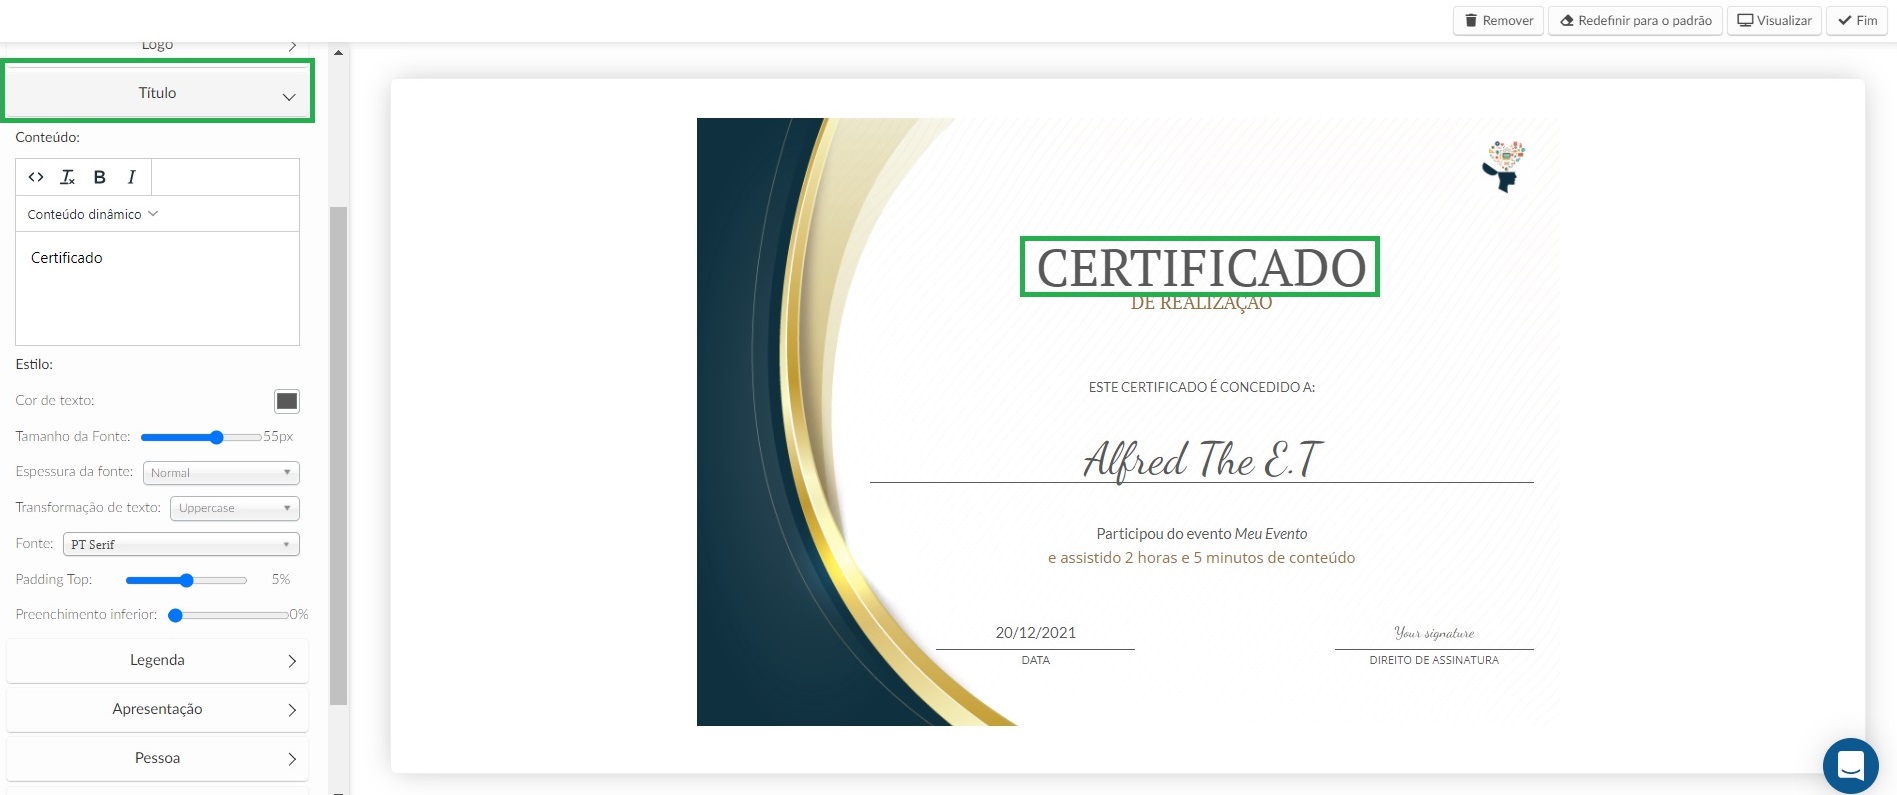 How to customize the title of the certificate